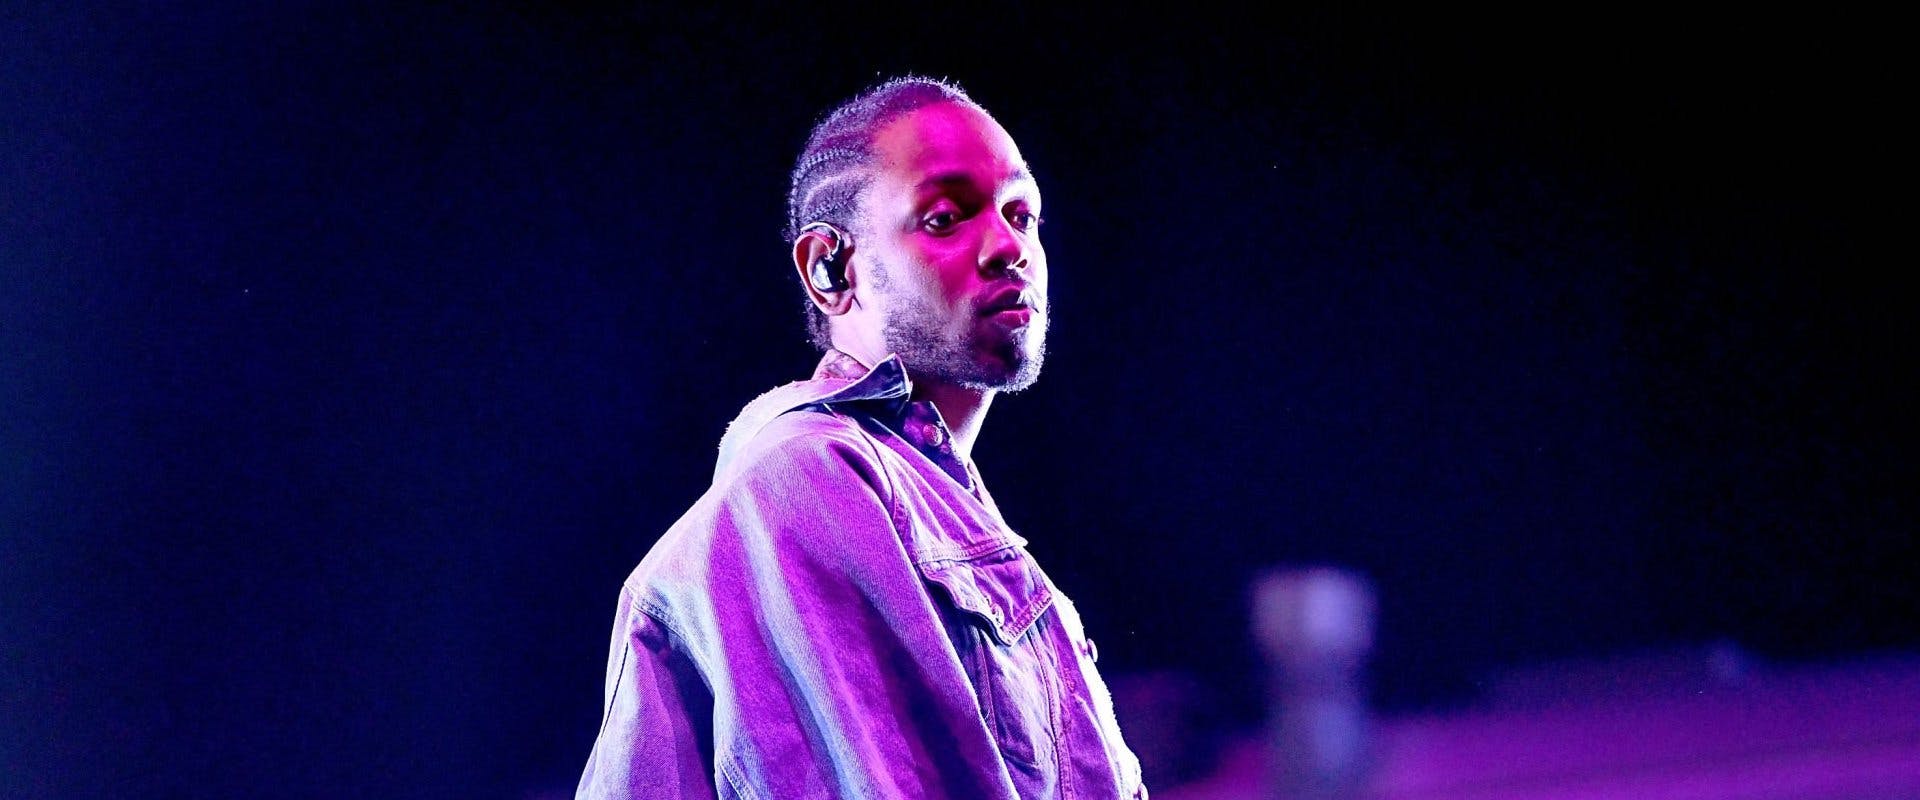 Kendrick Lamar performs as a special guest on the Coachella stage during week 1, day 1 of the Coachella Valley Music and Arts Festival on April 13, 2018 in Indio, California. (Photo by Scott Dudelson/Getty Images for Coachella )